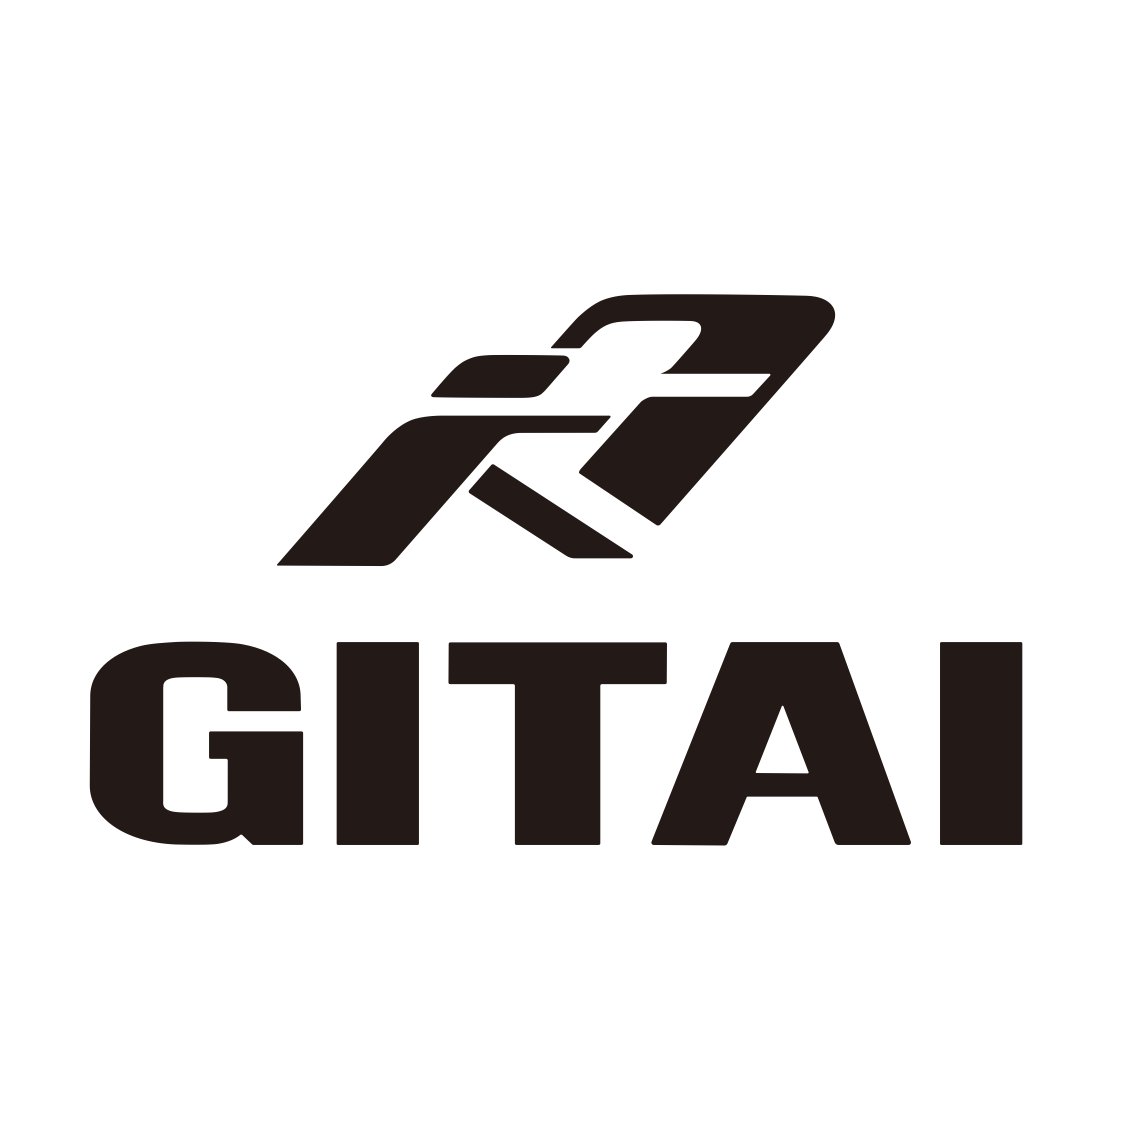 GITAI is a space robotics startup that aims to provide a safe and affordable means of labor in space.